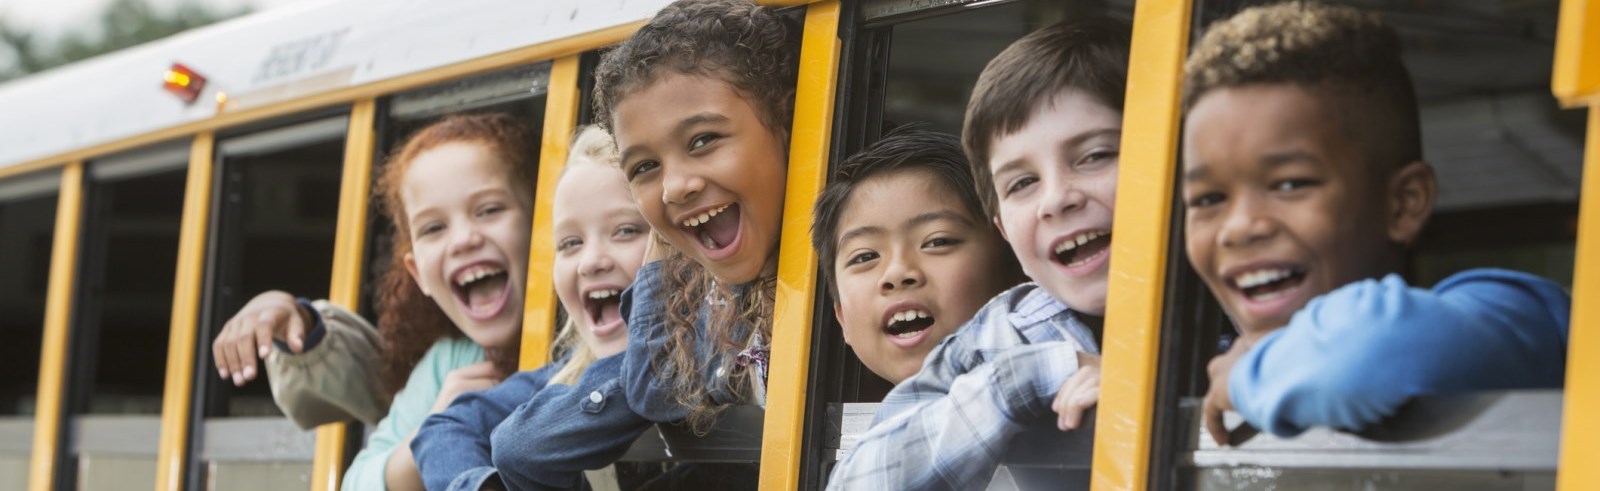 Children smiling with their heads out the bus windows